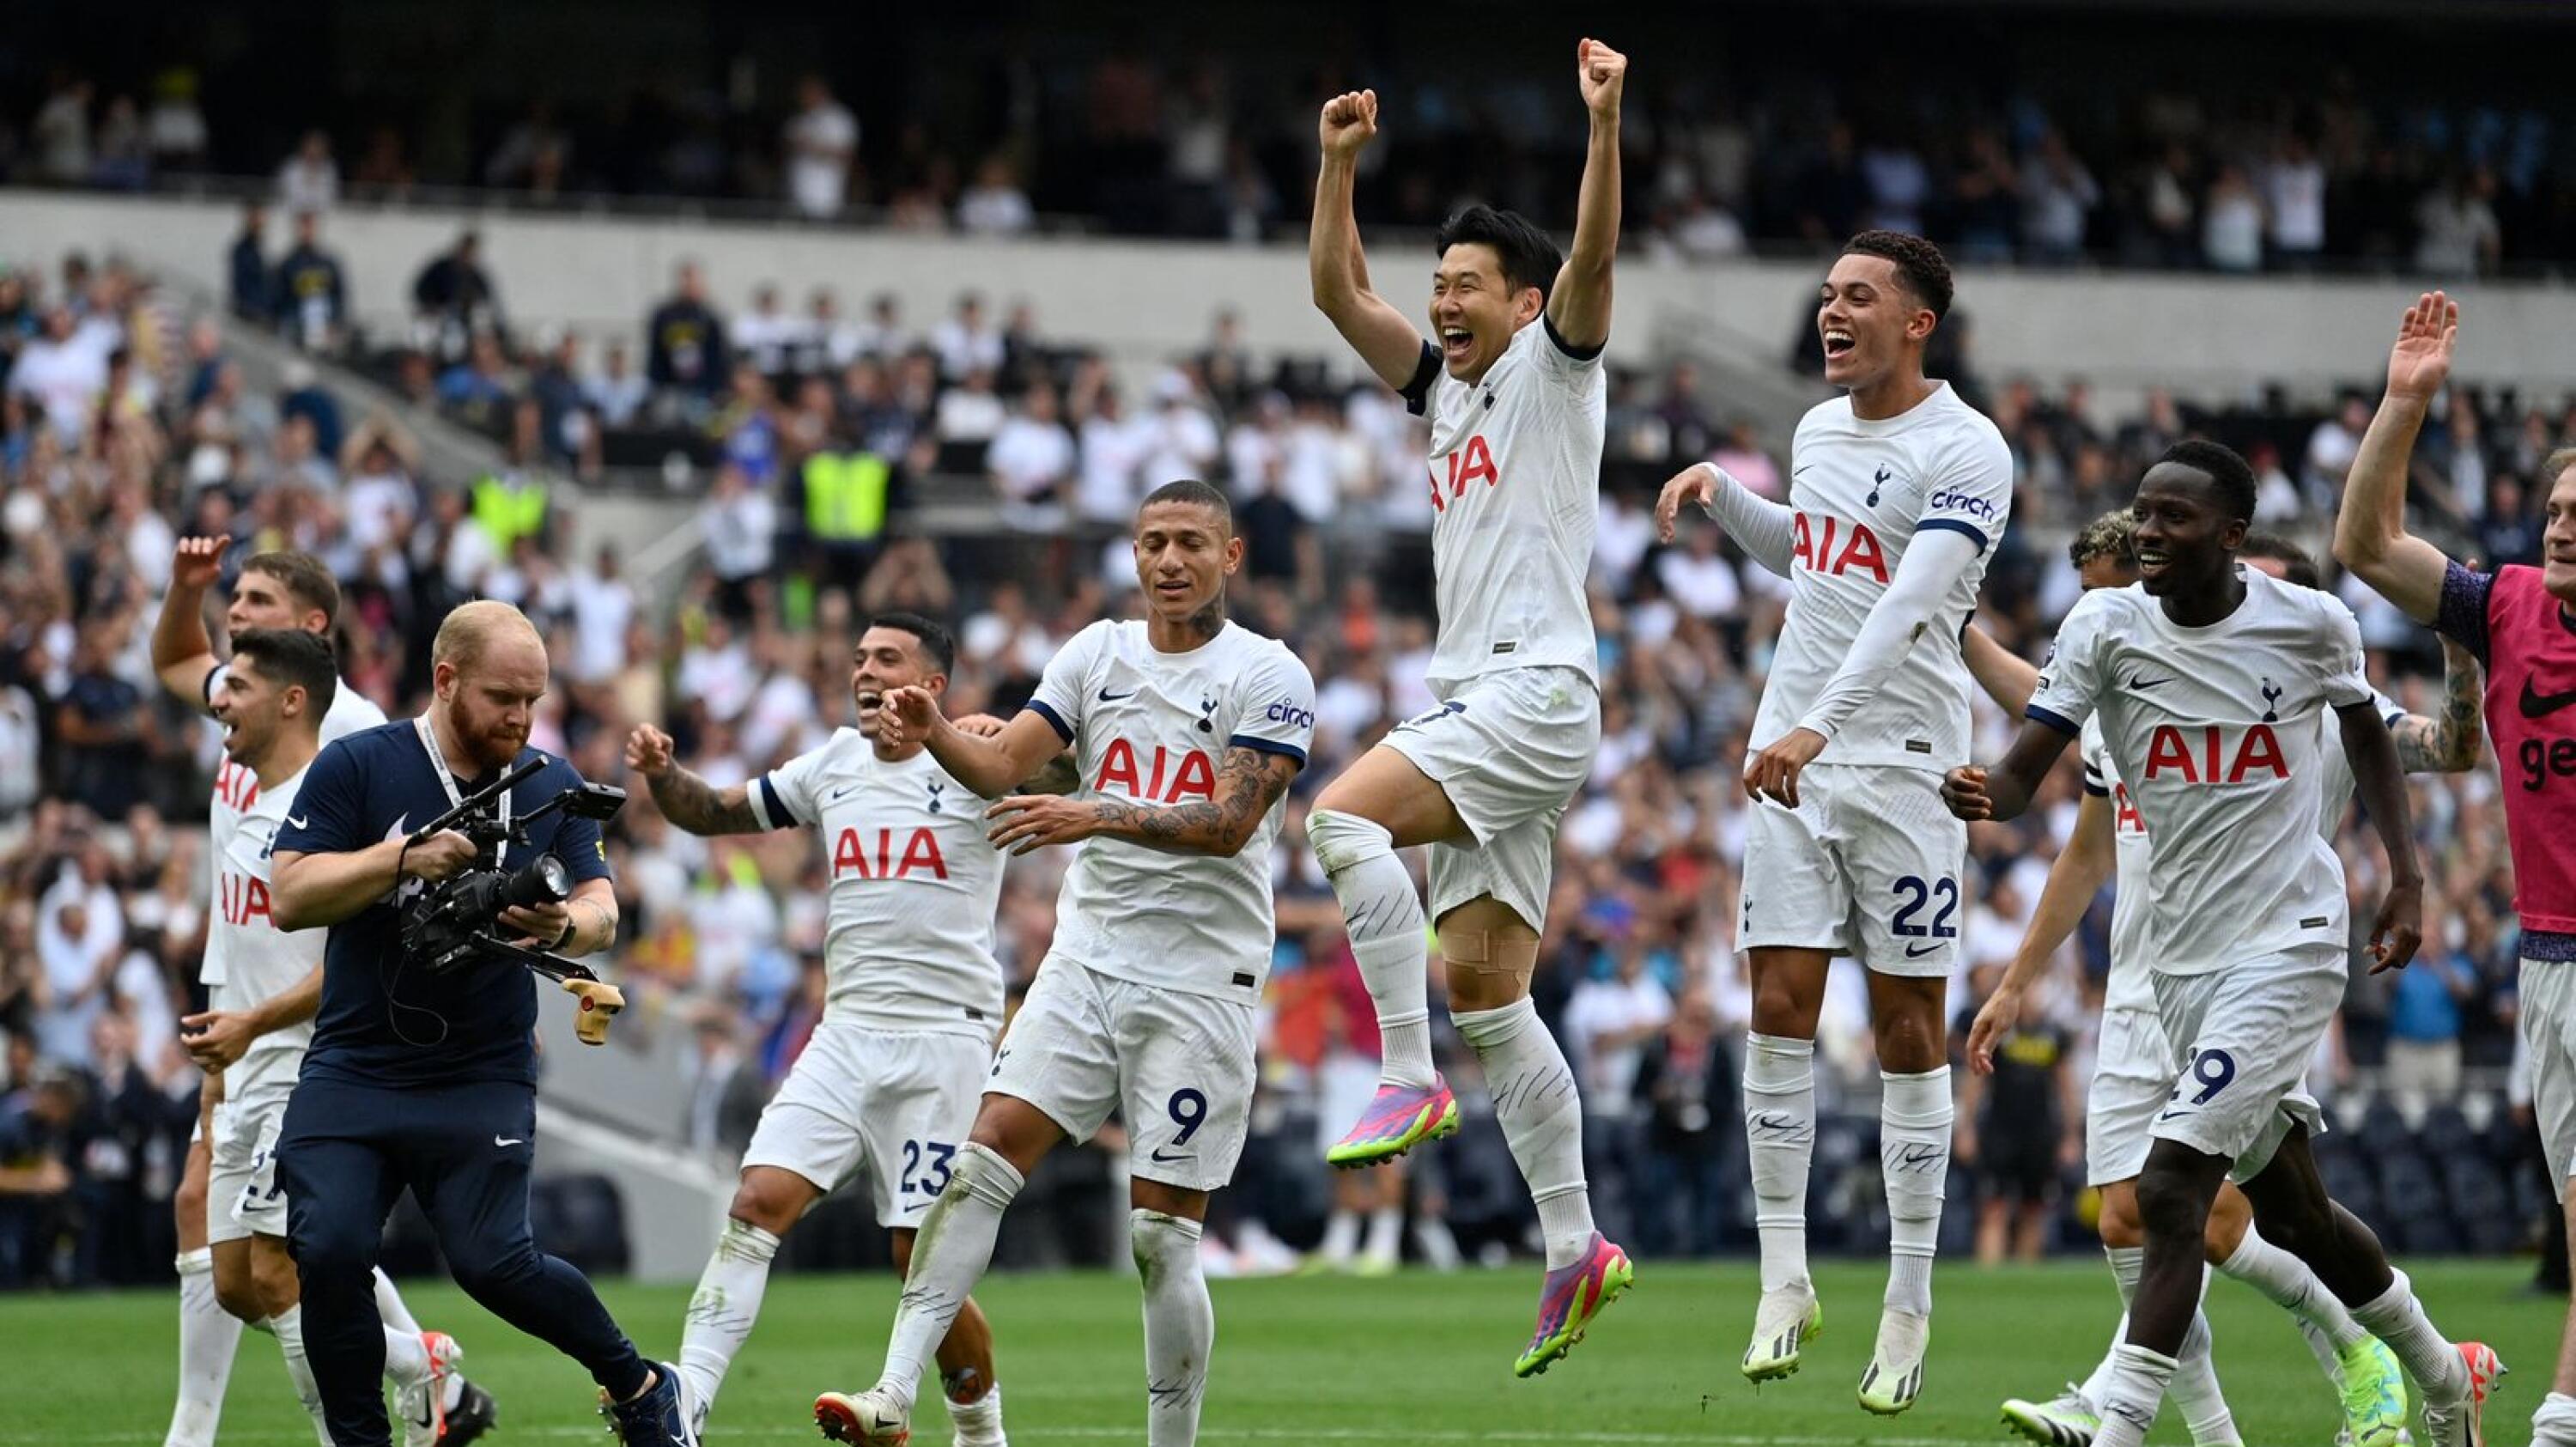 Tottenham Hotspur's players celebrate at the end of their Premier League football match against Sheffield United at Tottenham Hotspur Stadium